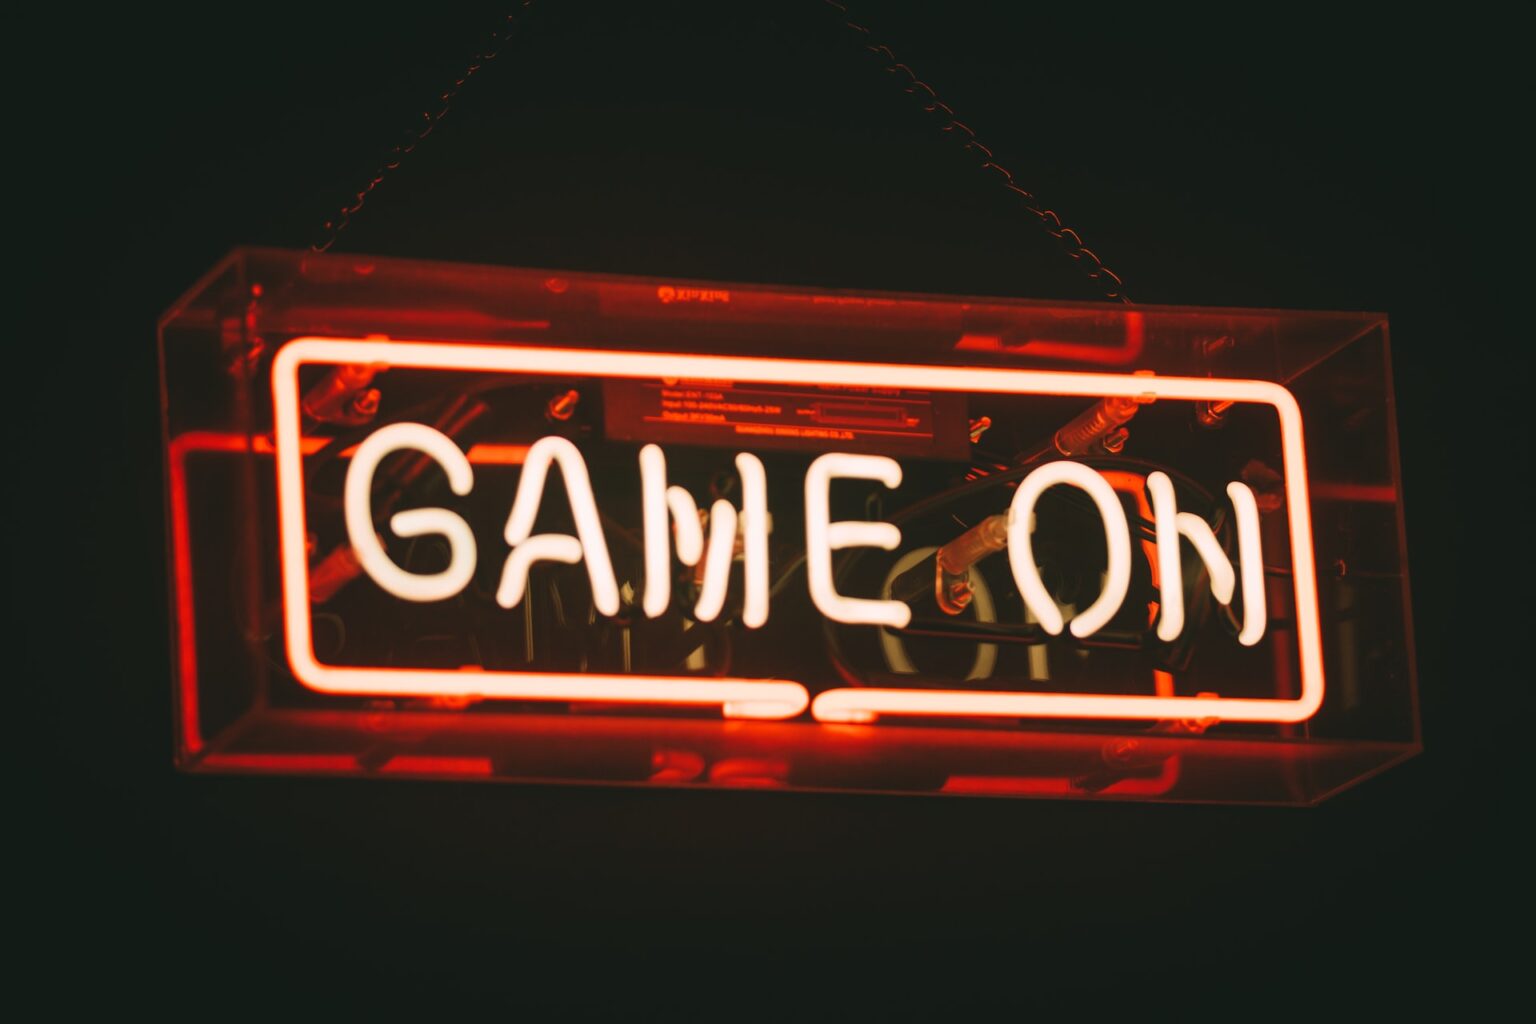 Neon sign reading “game on” in red and white against black background.